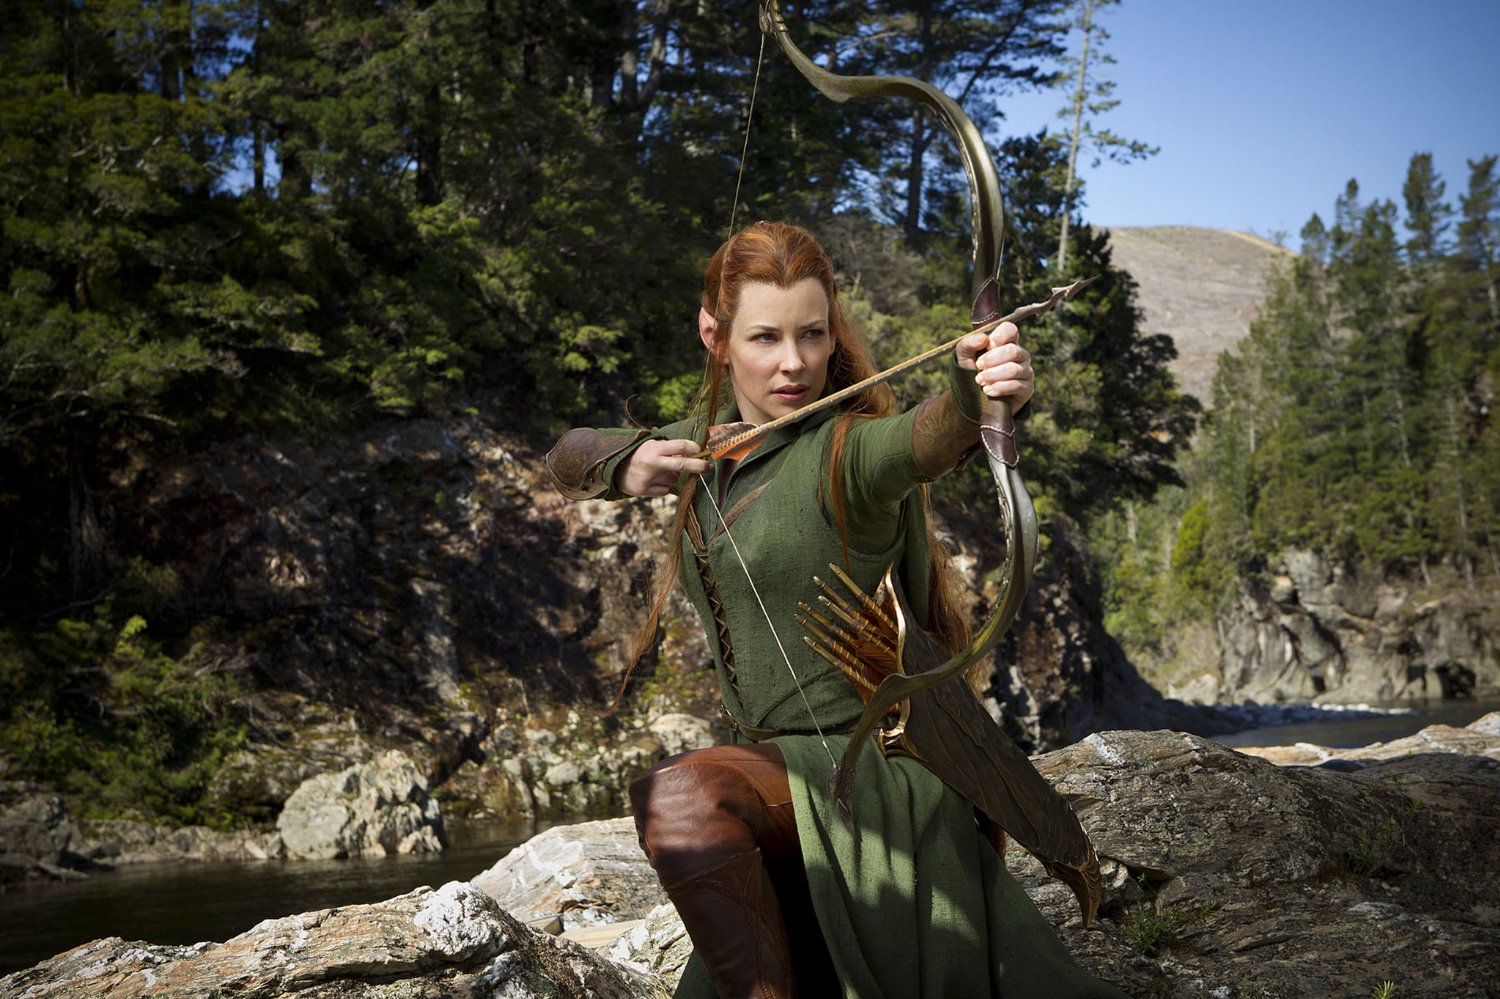 Evangeline Lilly as Tauriel in The Hobbit: The Desolation of Smaug (2013)